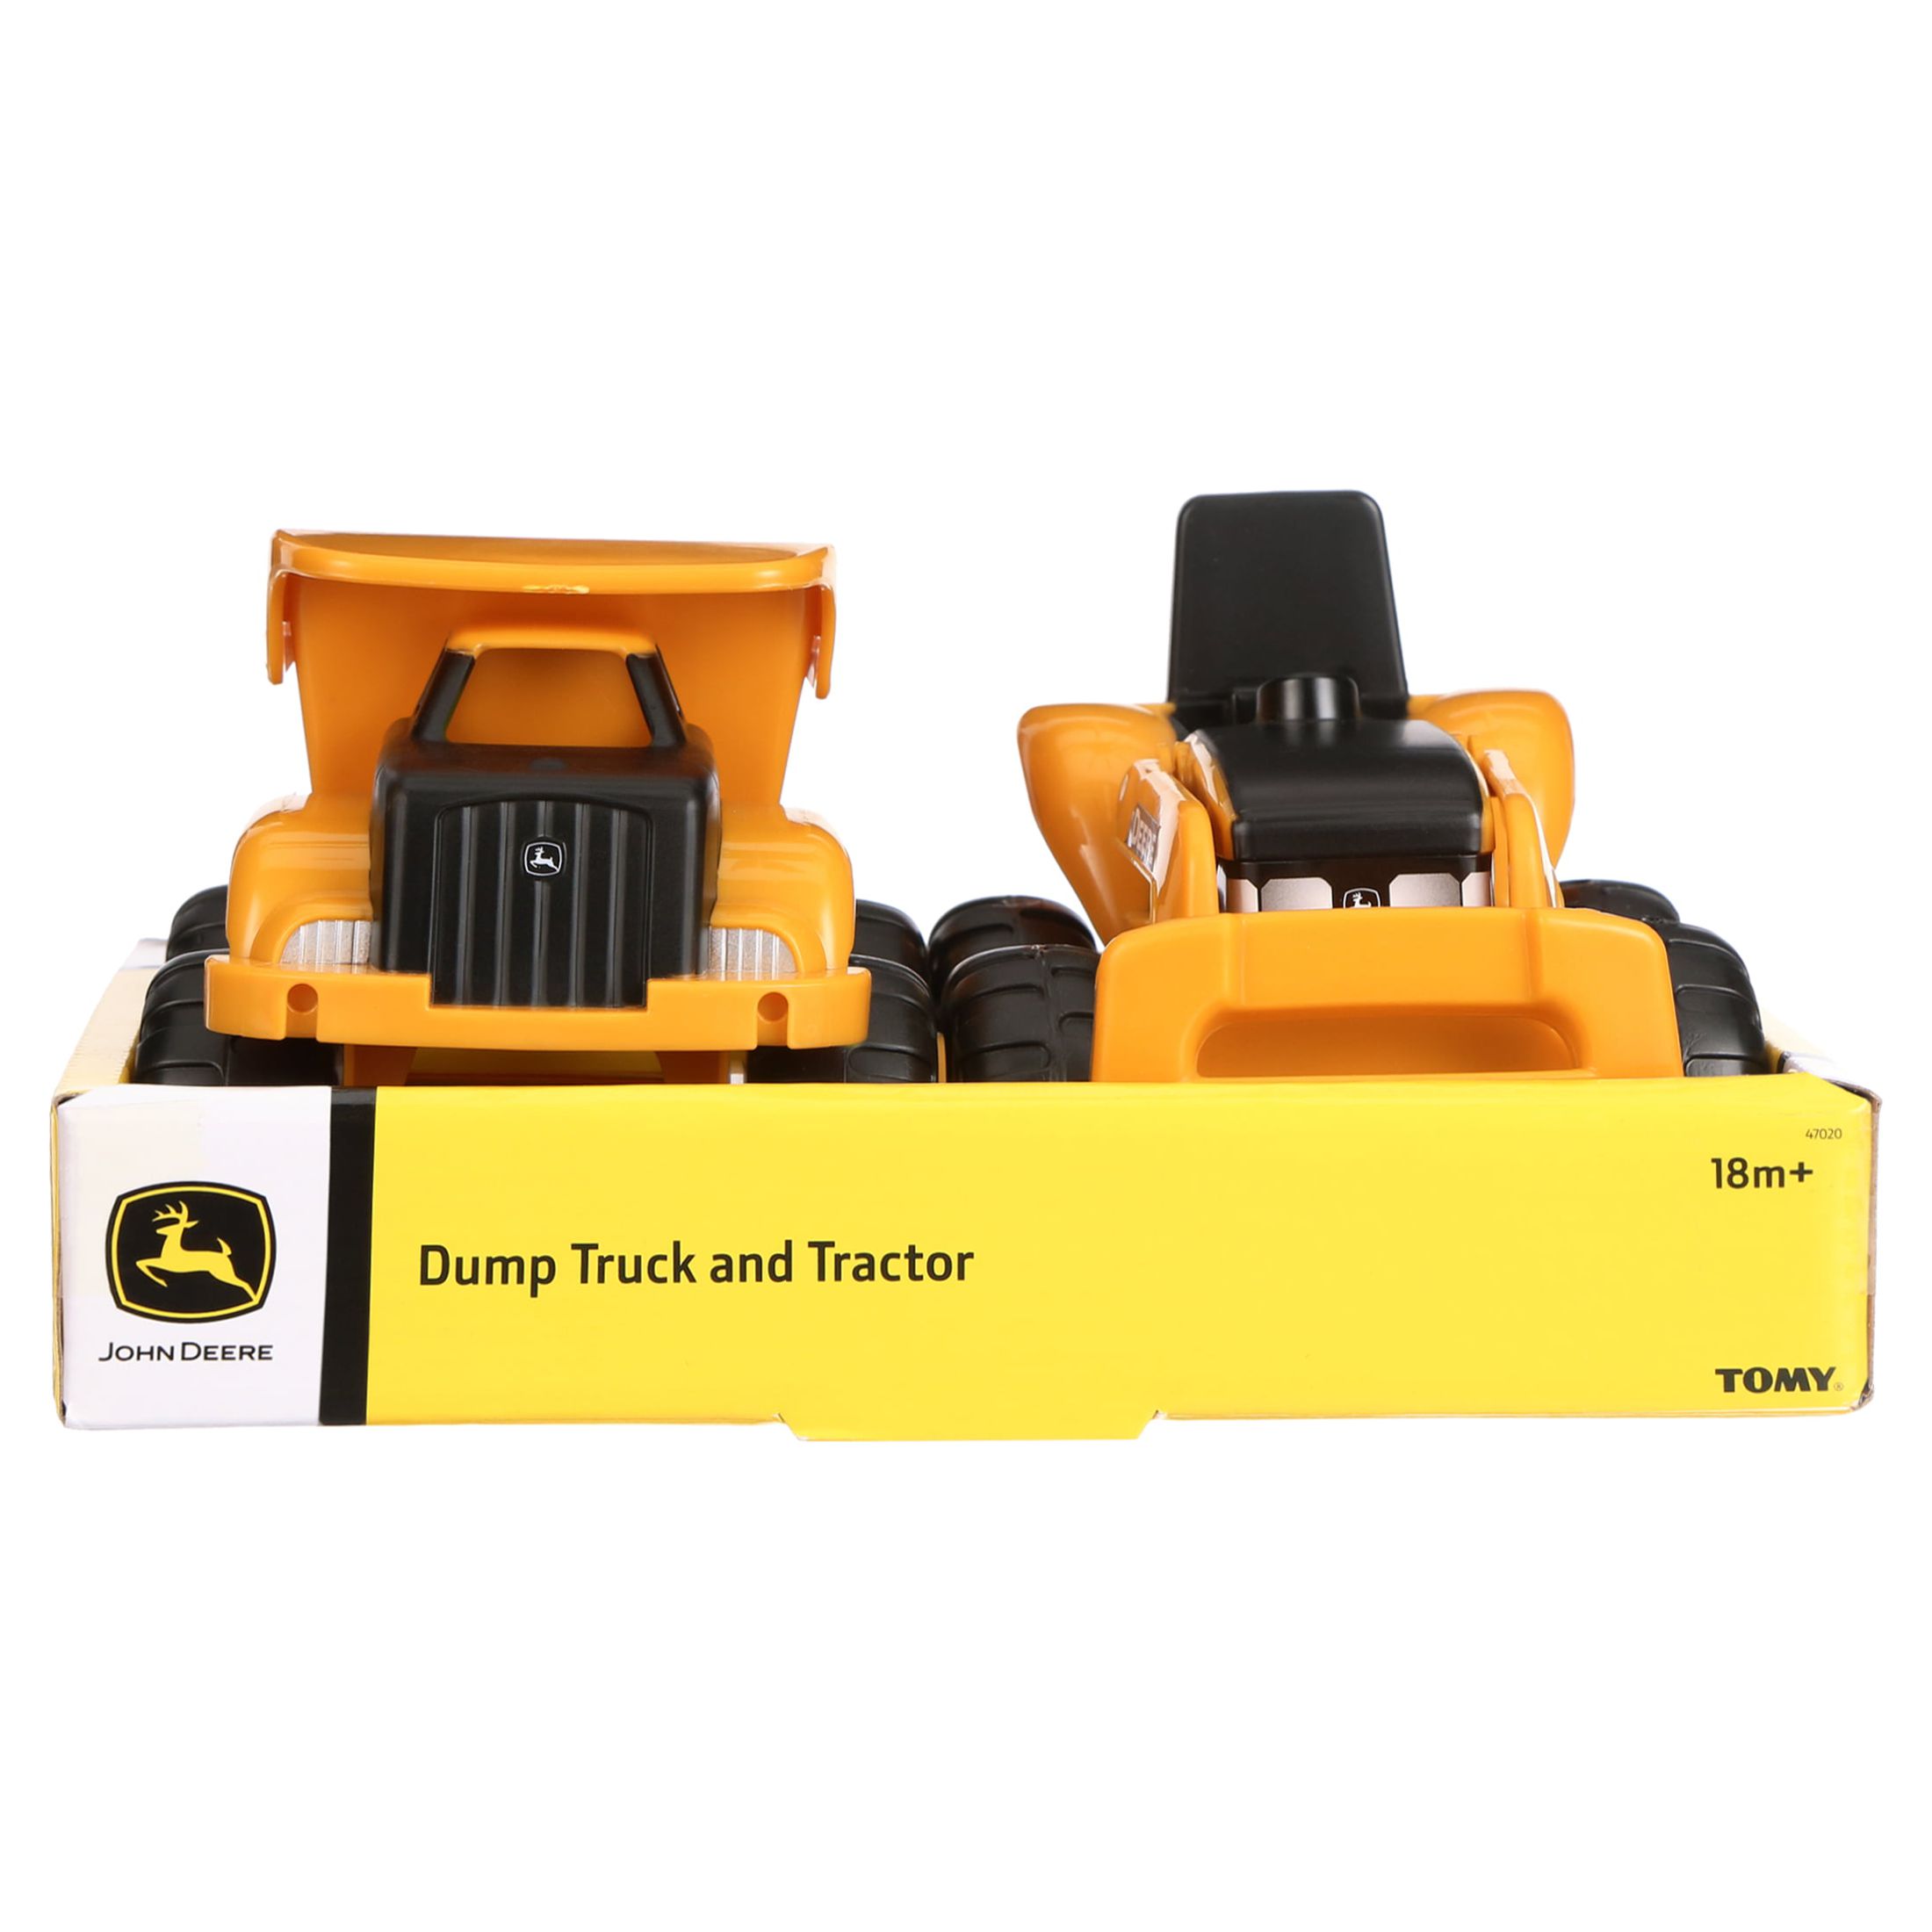 John Deere Sandbox 6" Construction Vehicle 2 Pack, Dump Truck & Tractor with Loader, Yellow - image 5 of 13